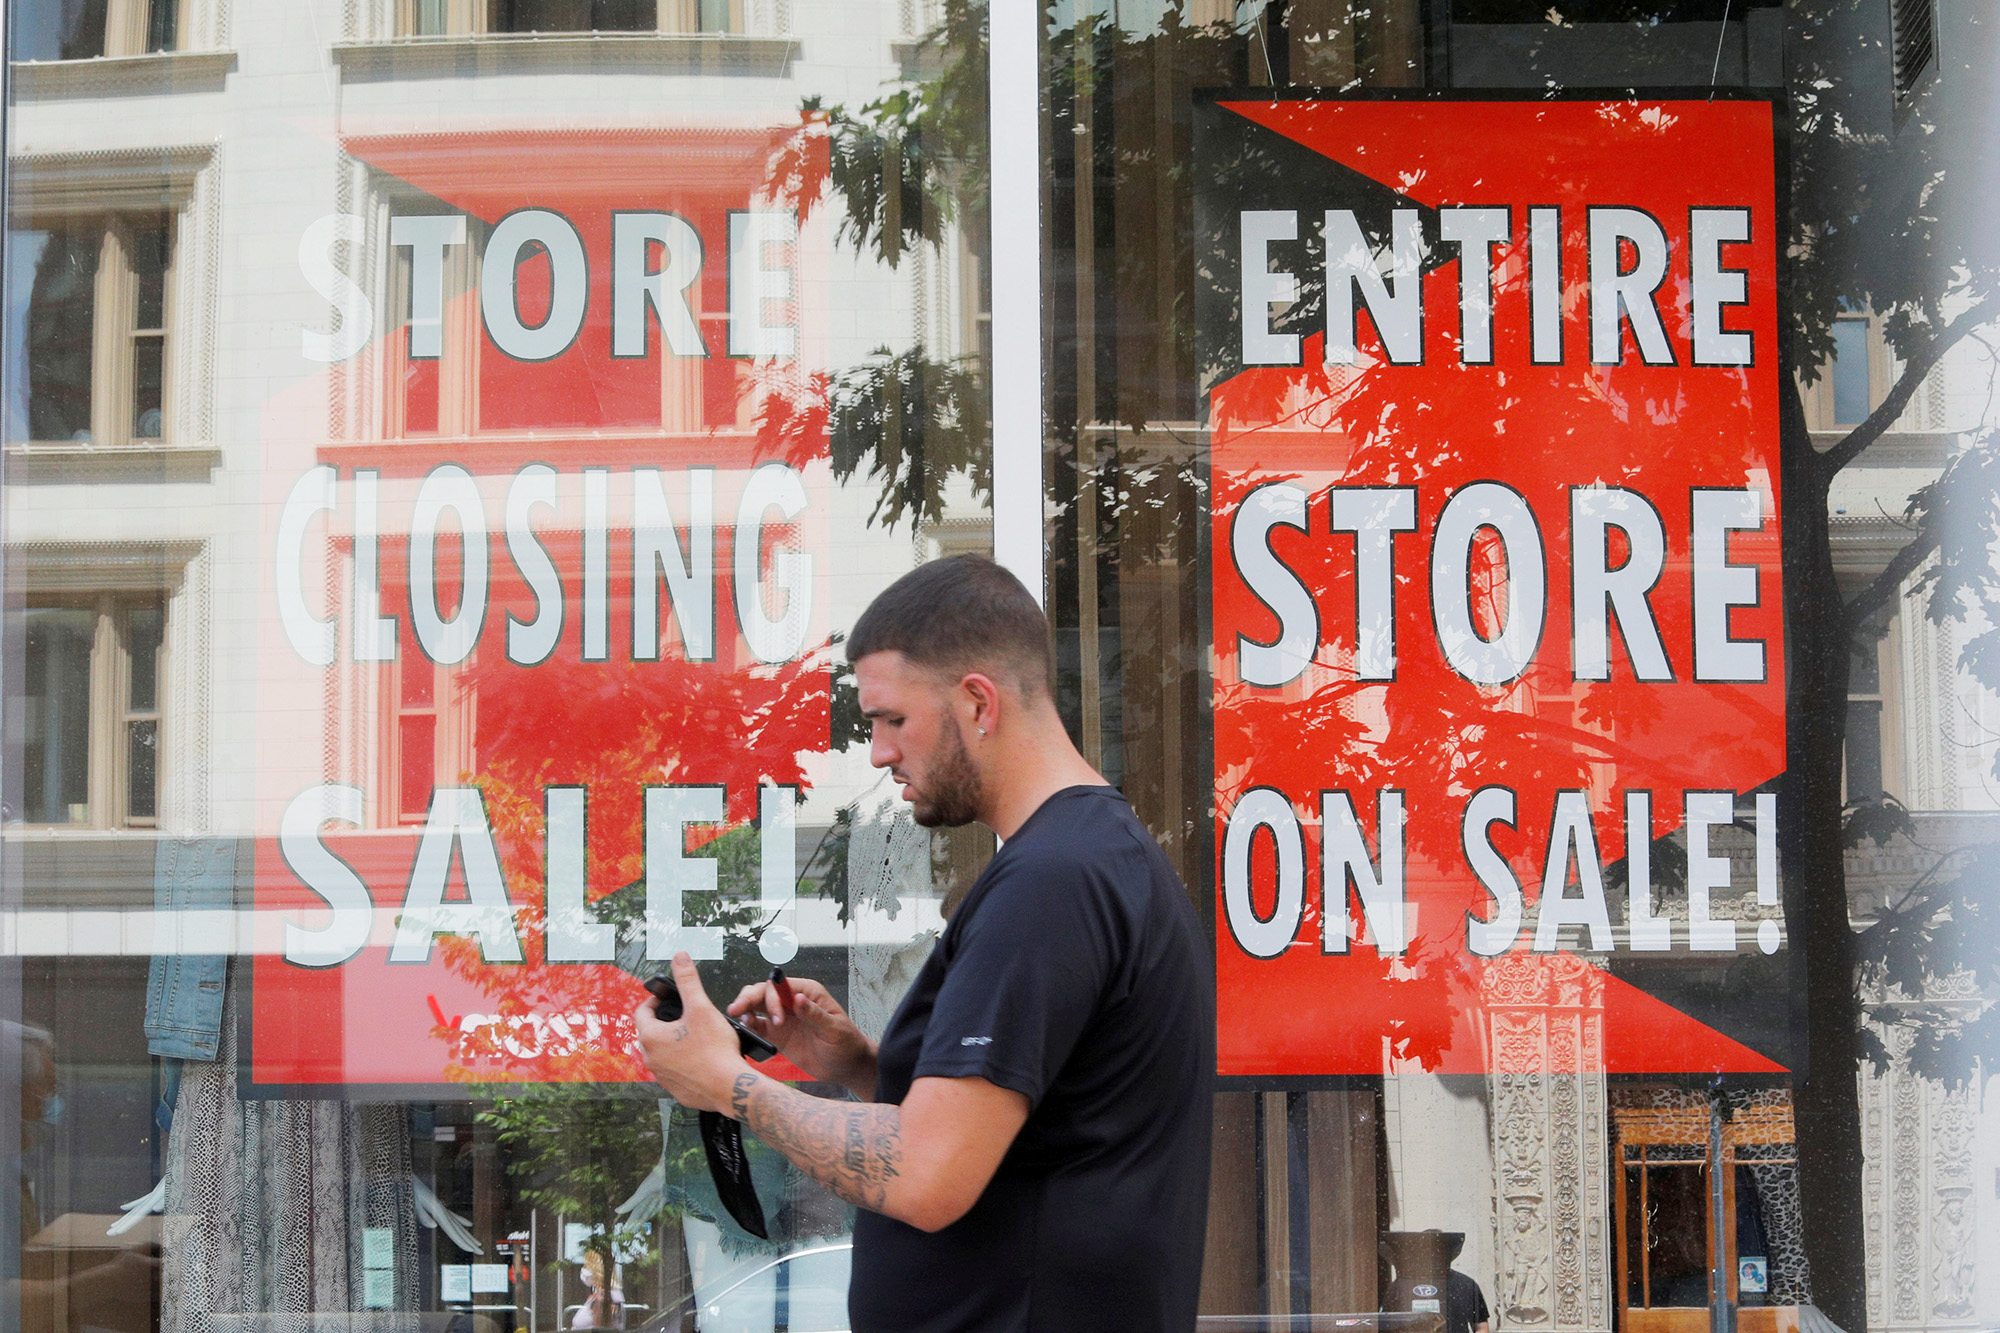 PHOTO: A man walks past signs in the windows of Lord & Taylor, advertising a store closing sale, in Boston, Aug.5, 2020.